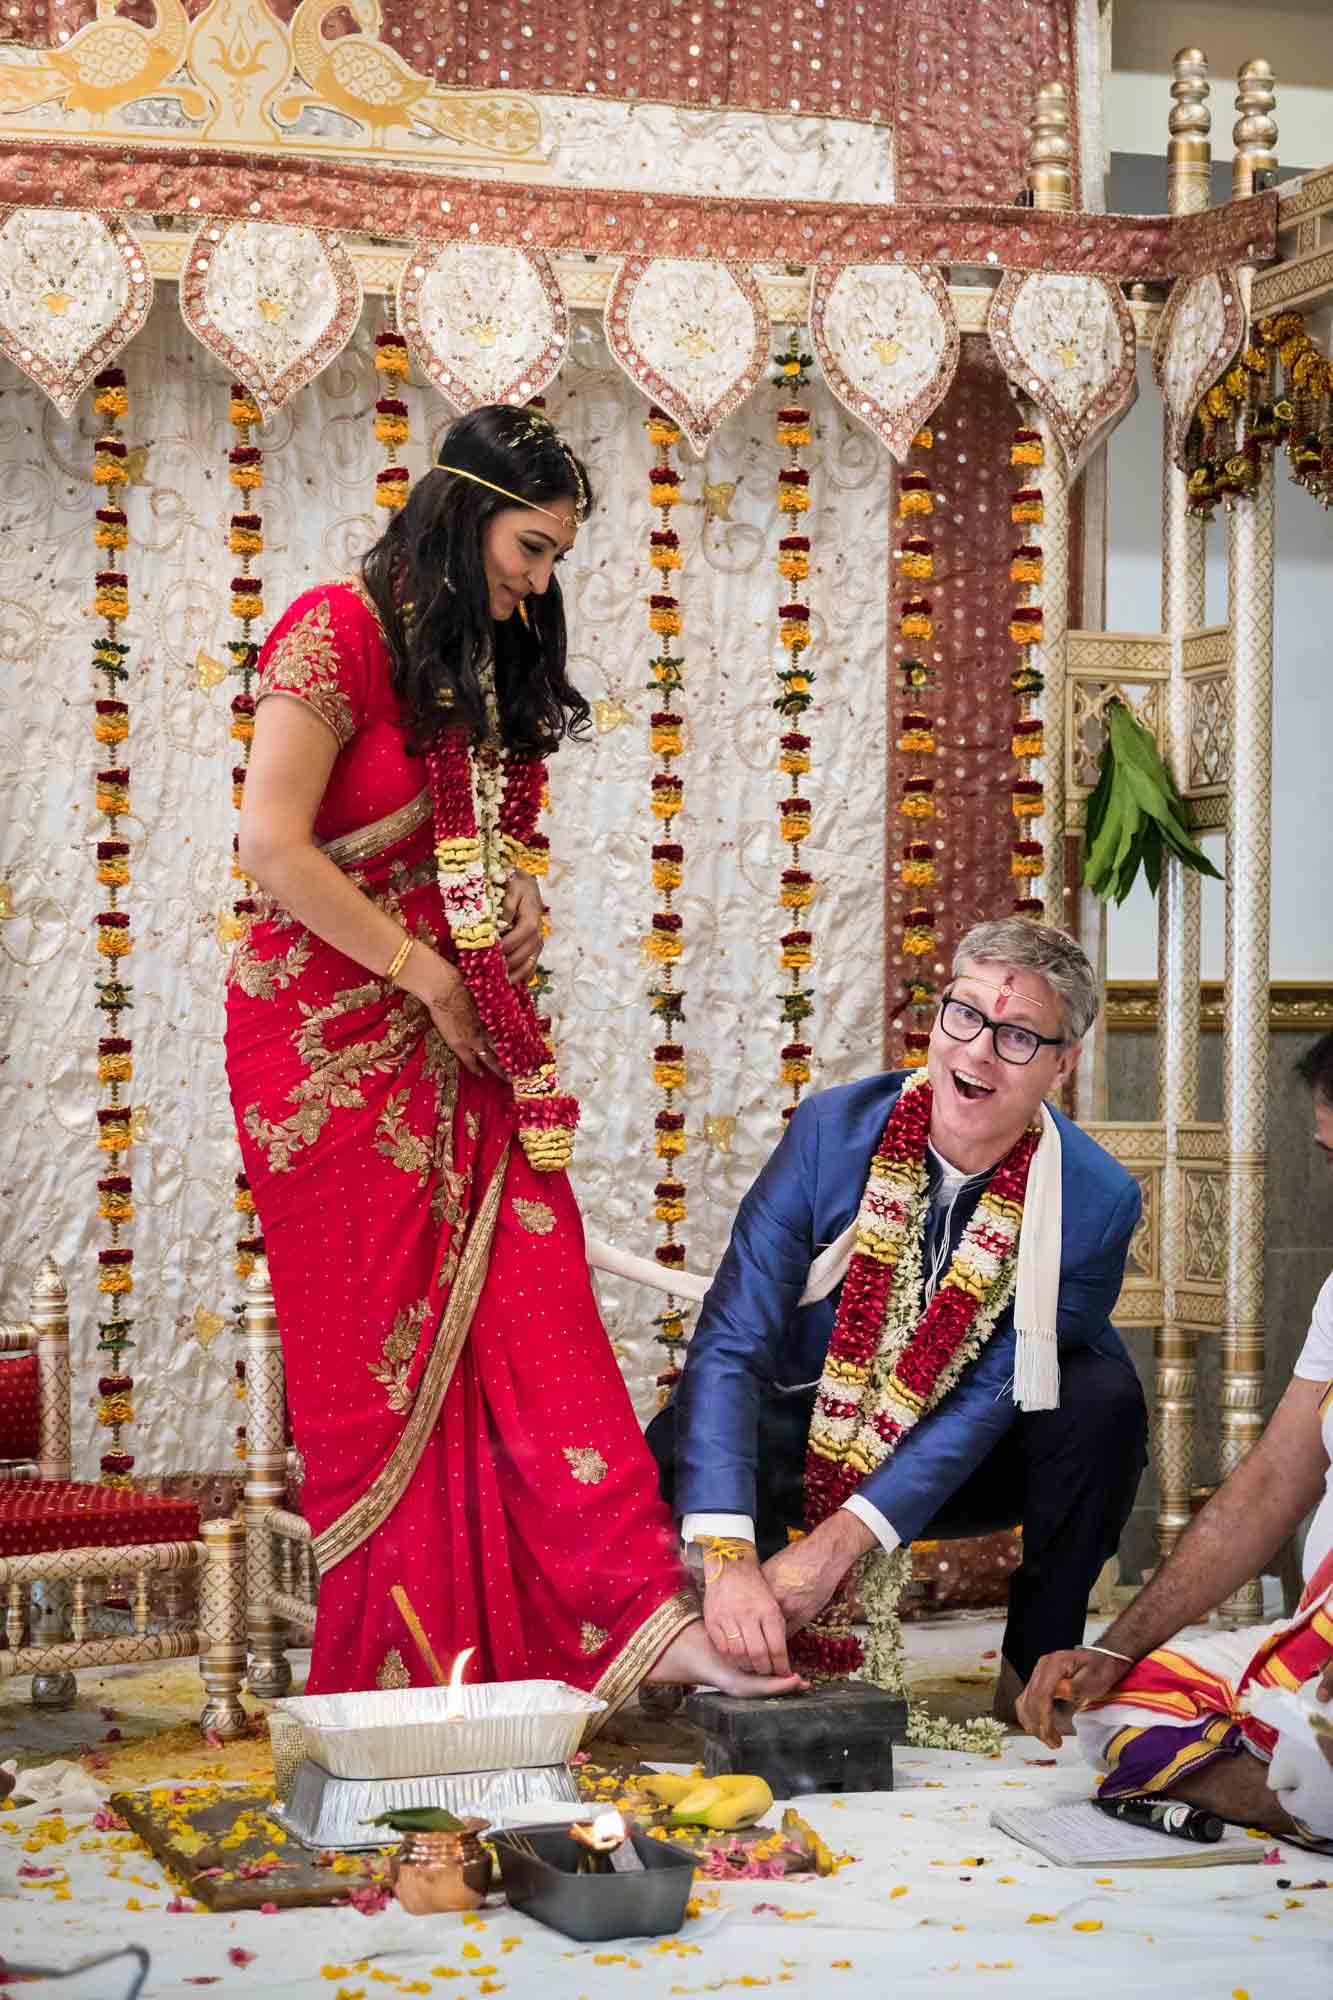 Groom putting ring on bride's toe at a Ganesha Temple wedding